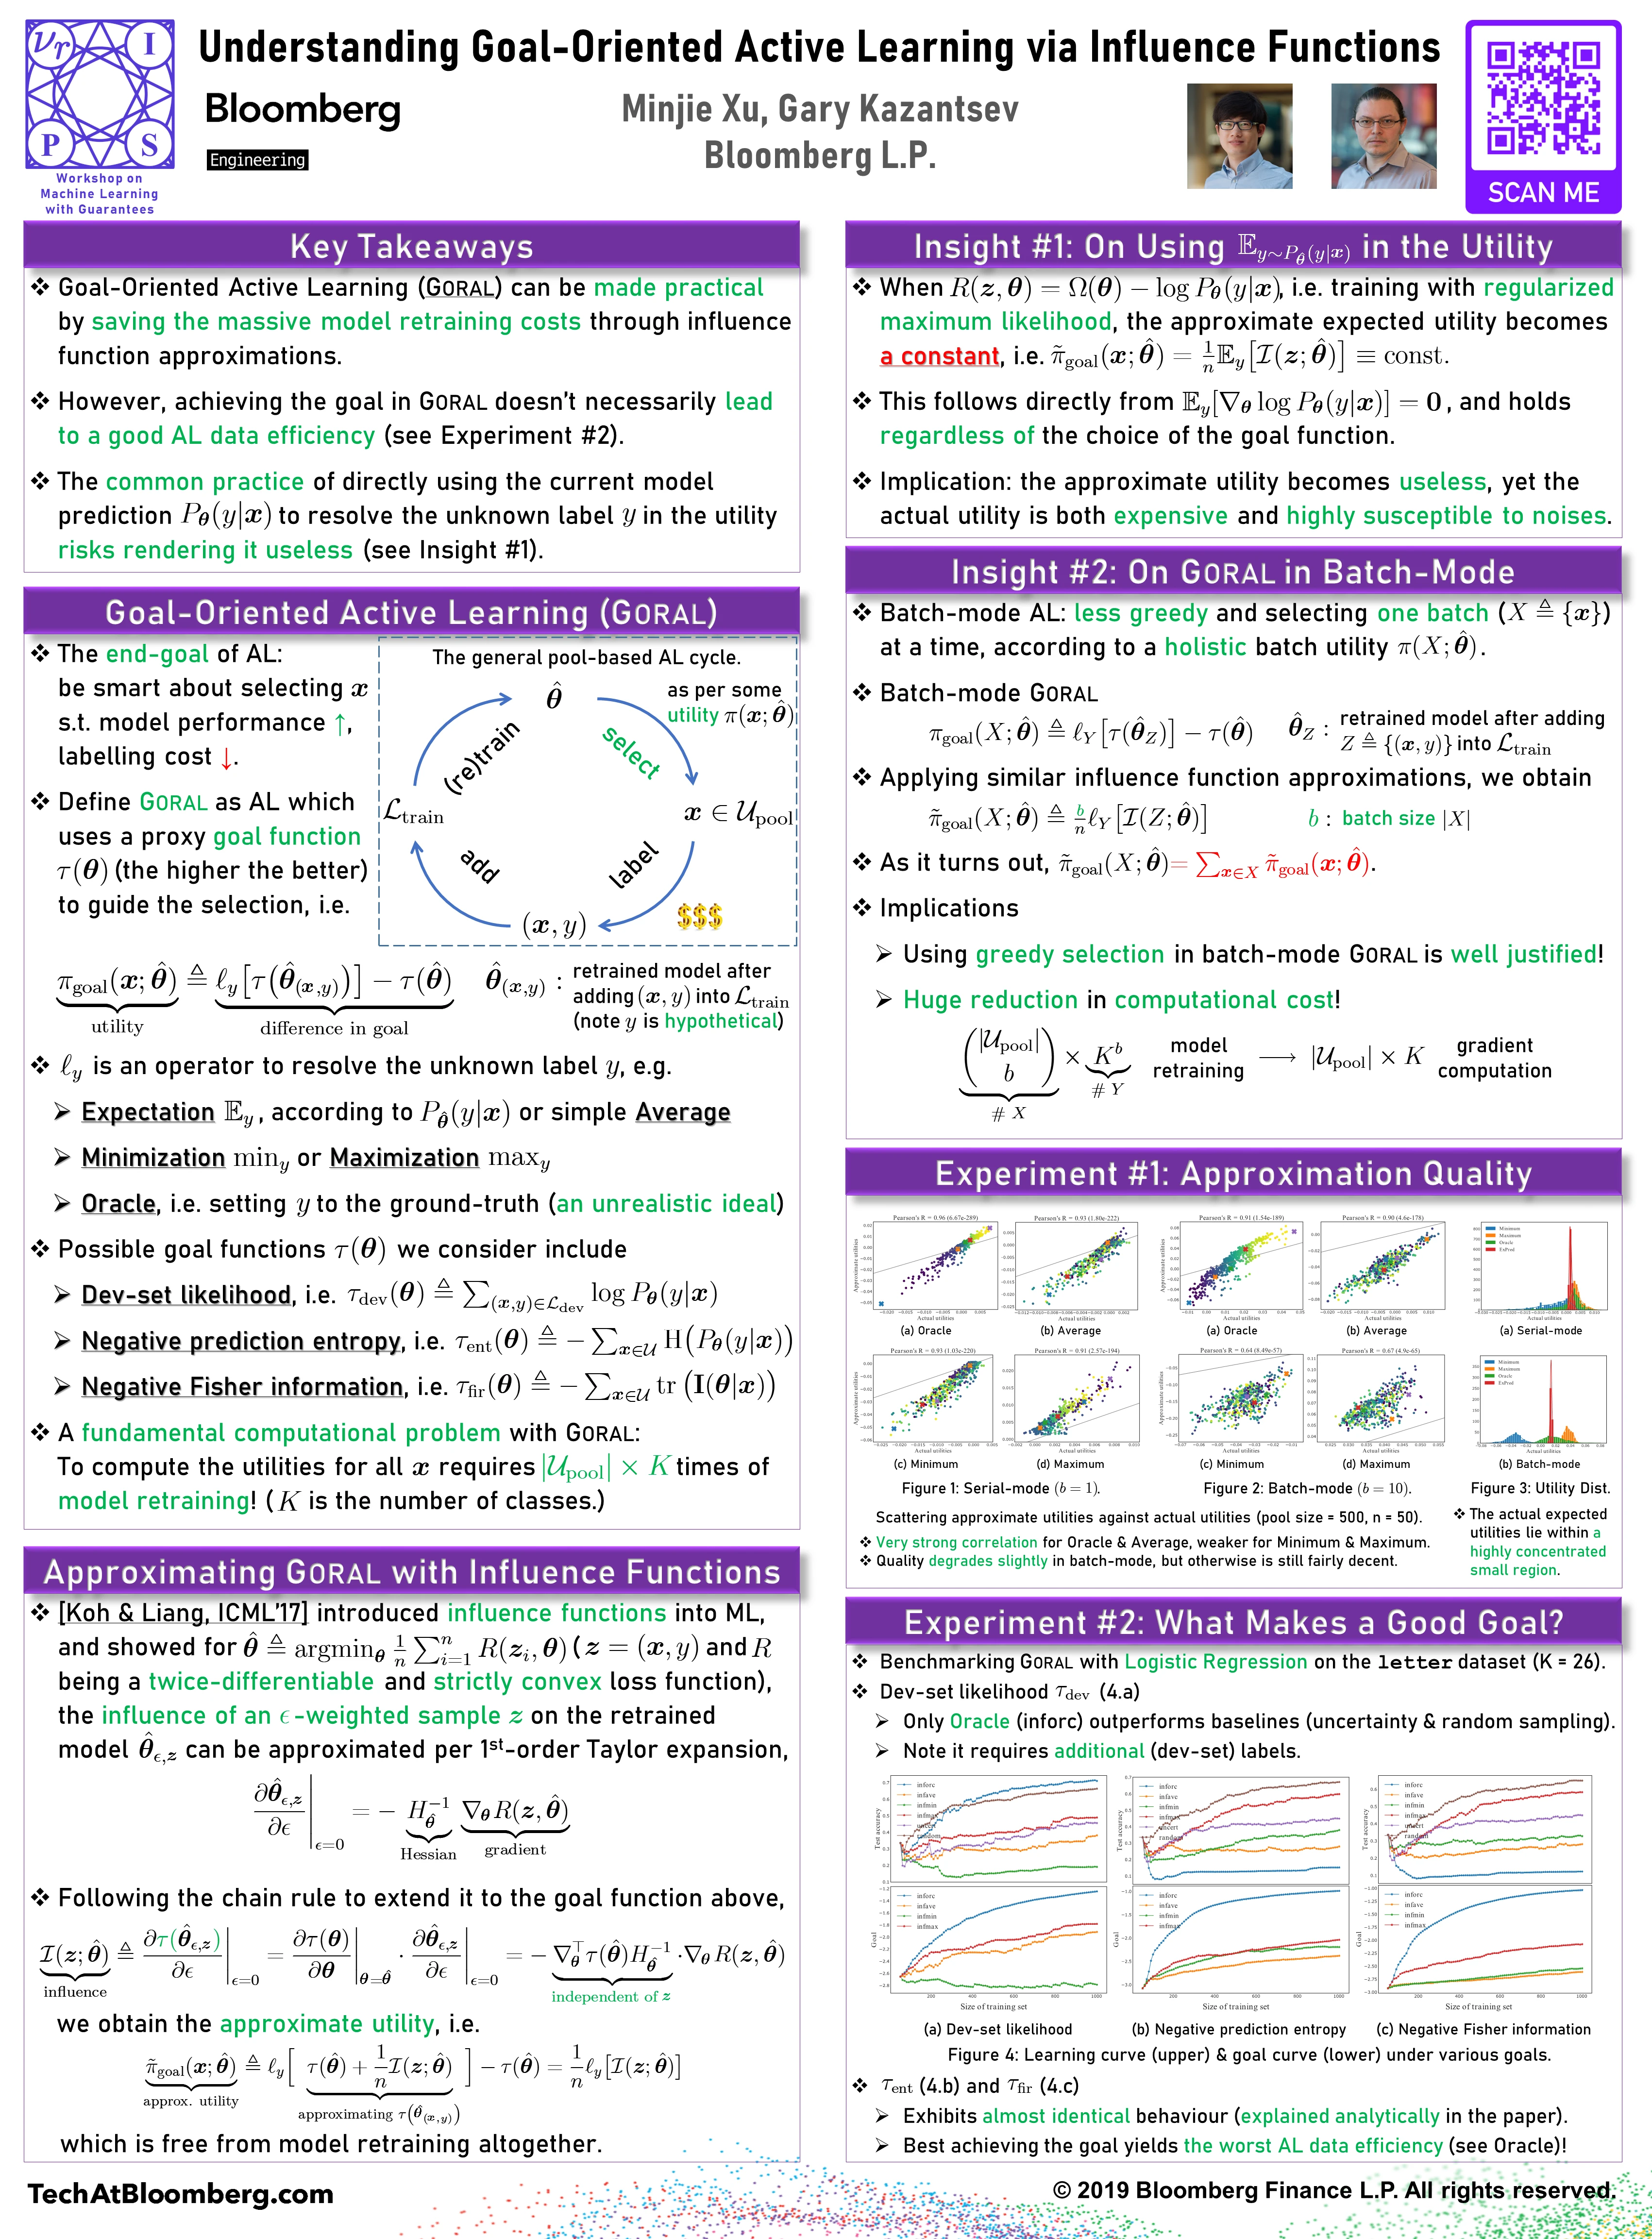 Gary Kazantsev presented this poster on behalf of corresponding author Minjie Xu during the poster session of the NeurIPS 2019 Workshop on Machine Learning with Guarantees (click on the image to download a PDF of the poster).